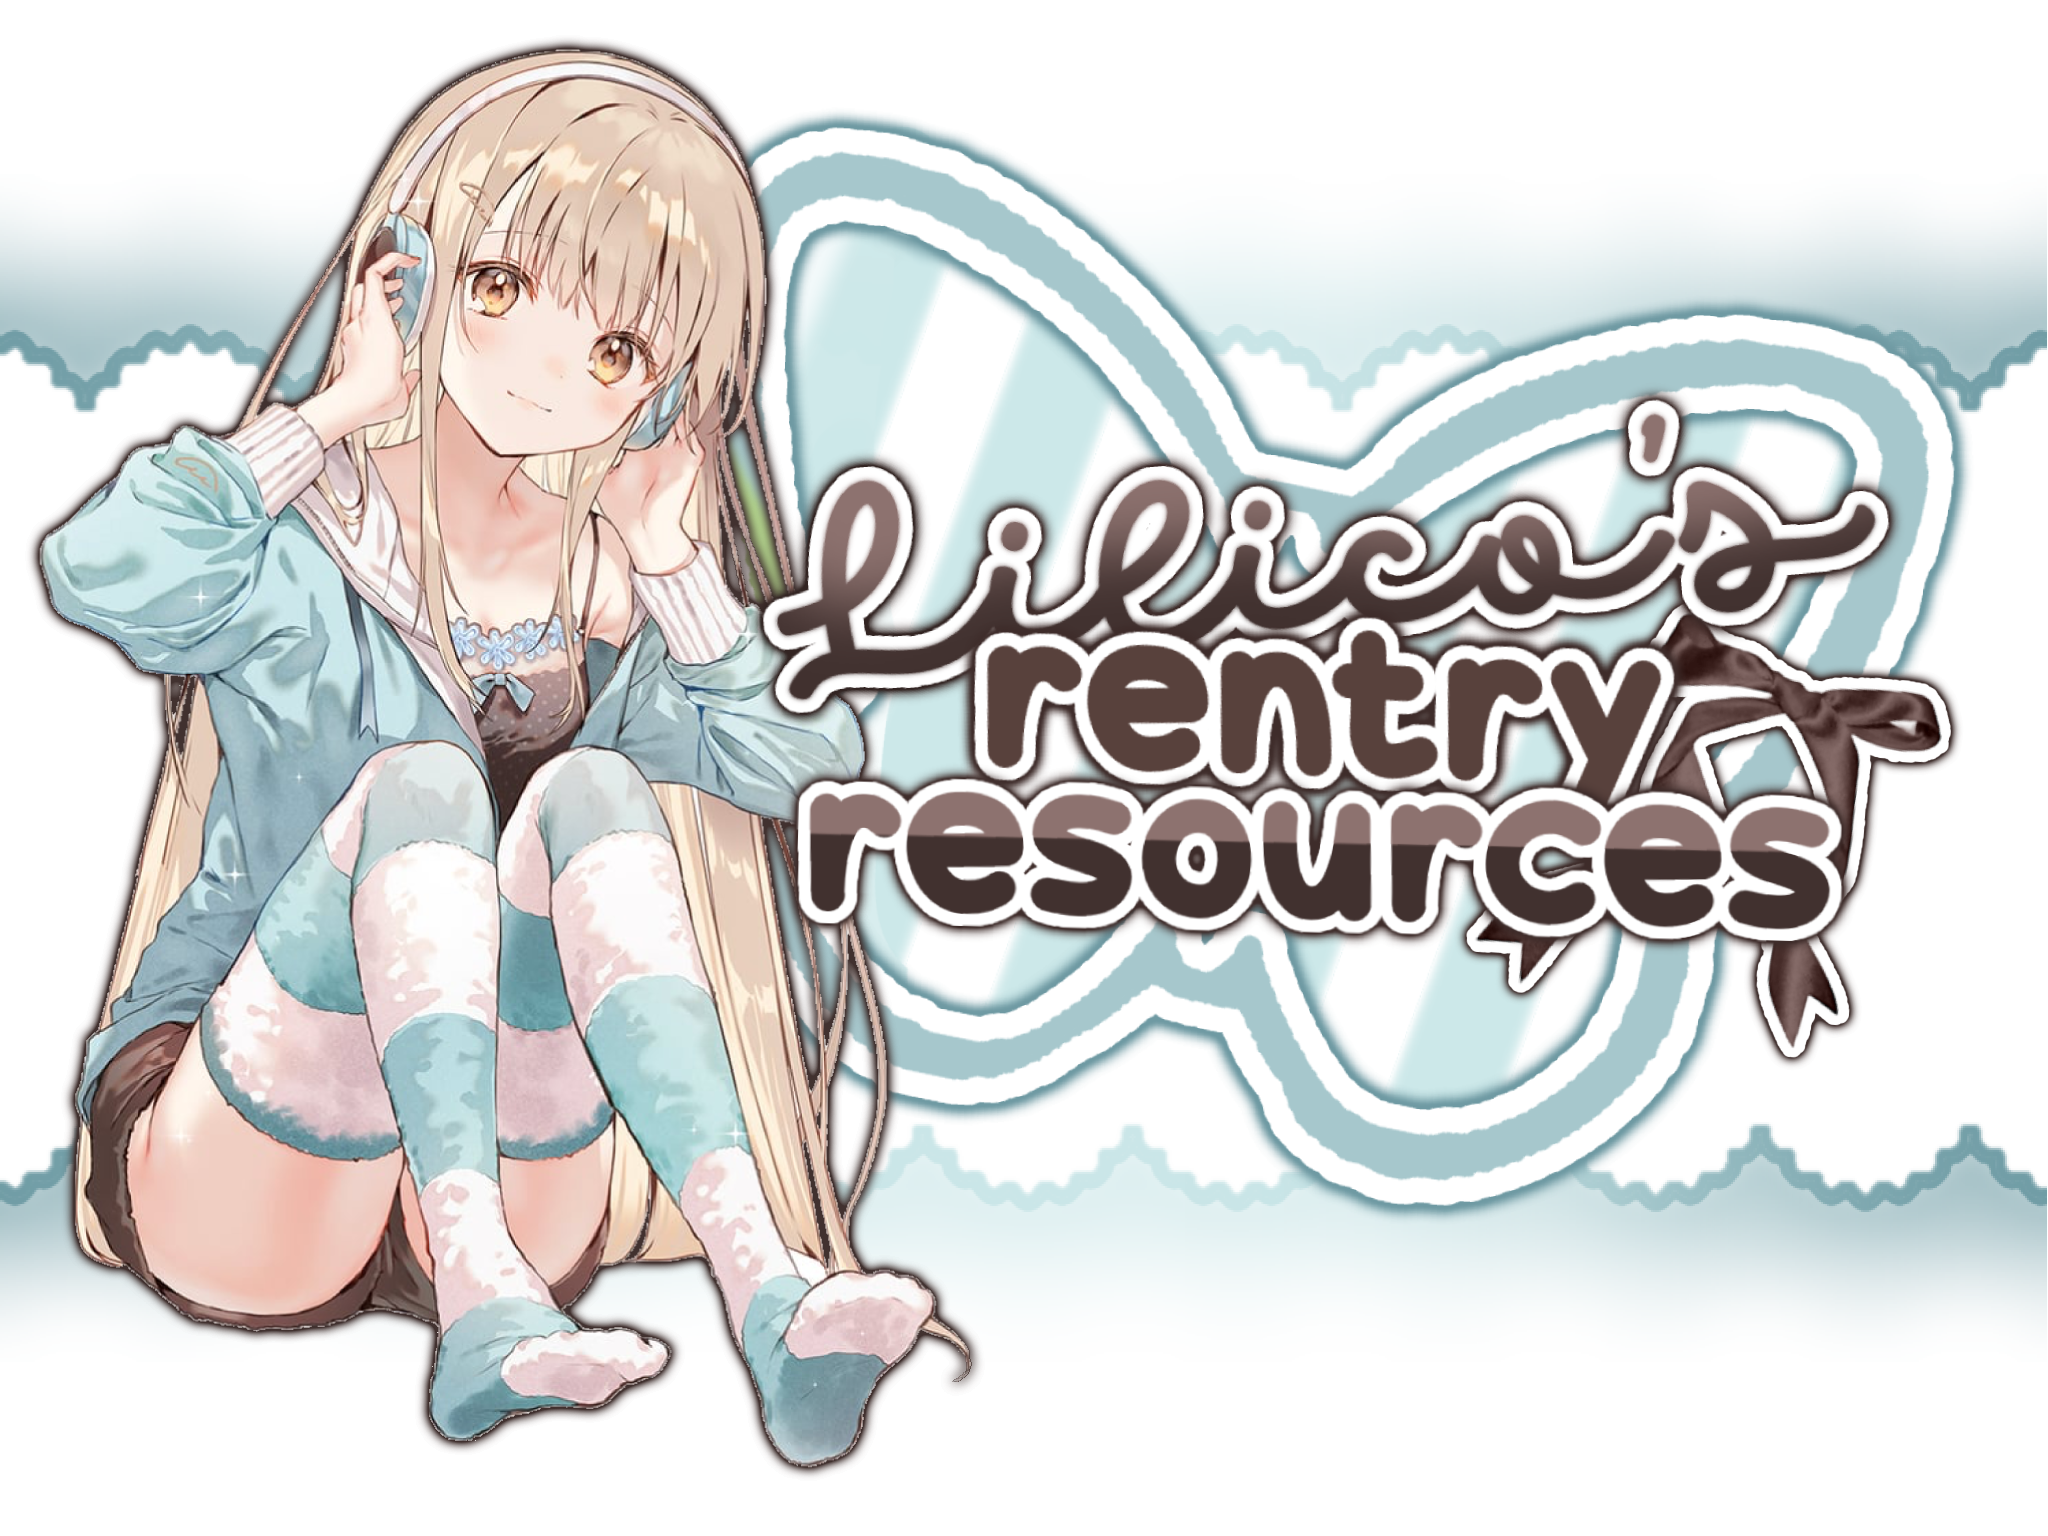 DNS．Lilico's rentry resources